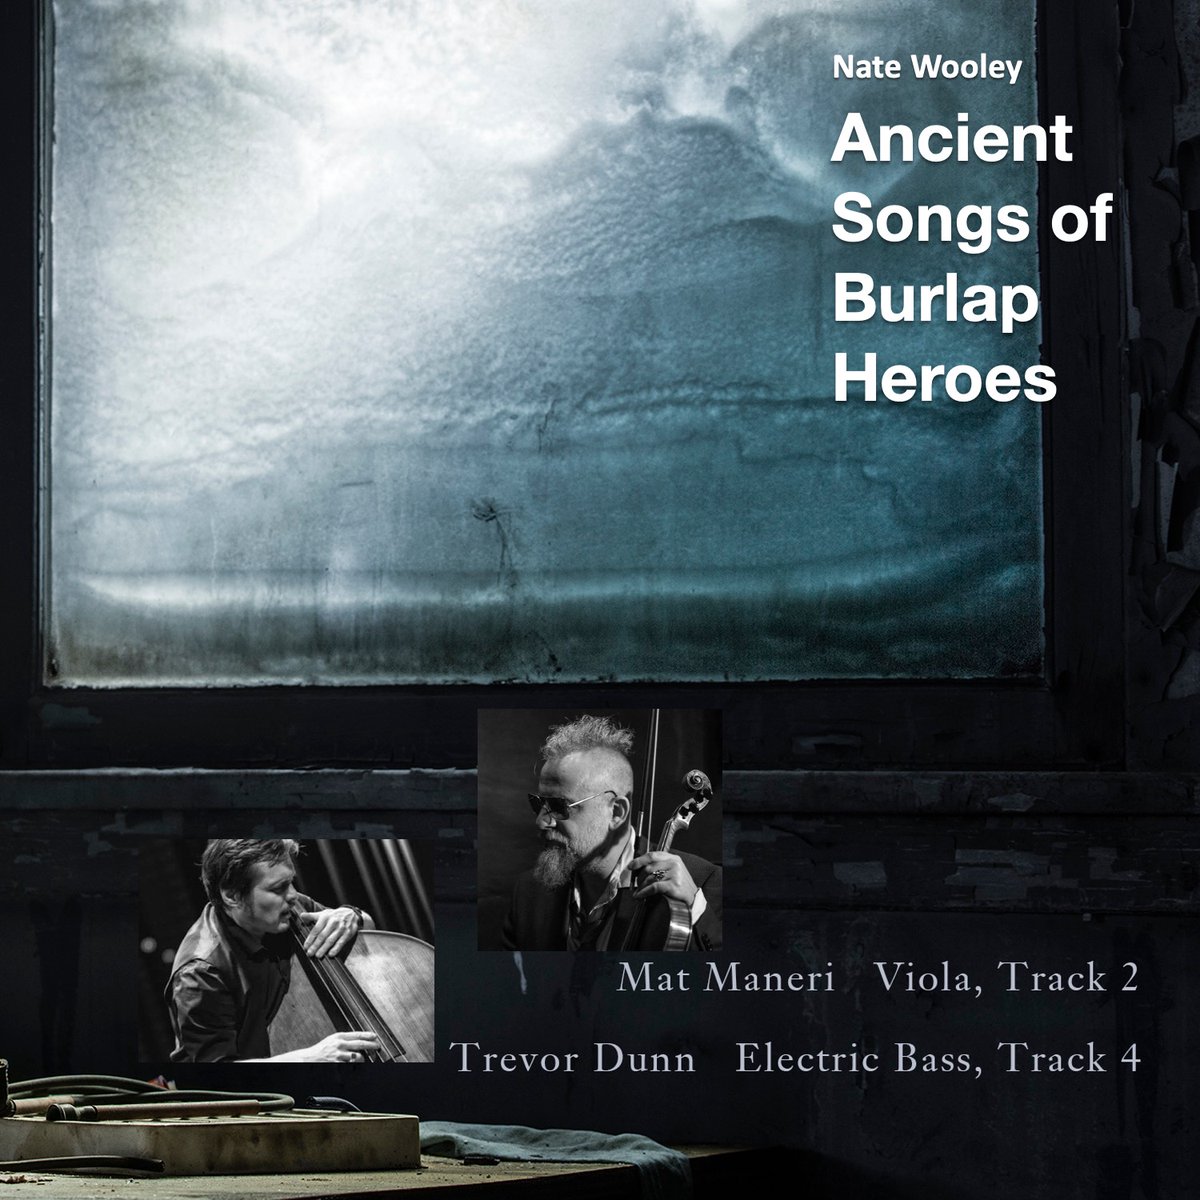 Check out violist Mat Maneri and electric bassist Trevor Dunn “Ancient Songs of Burlap Heroes,” due out July 29, 2022. Pre-order ”Ancient Songs of Burlap Heroes” natewooleypyroclastic.bandcamp.com/album/ancient-…